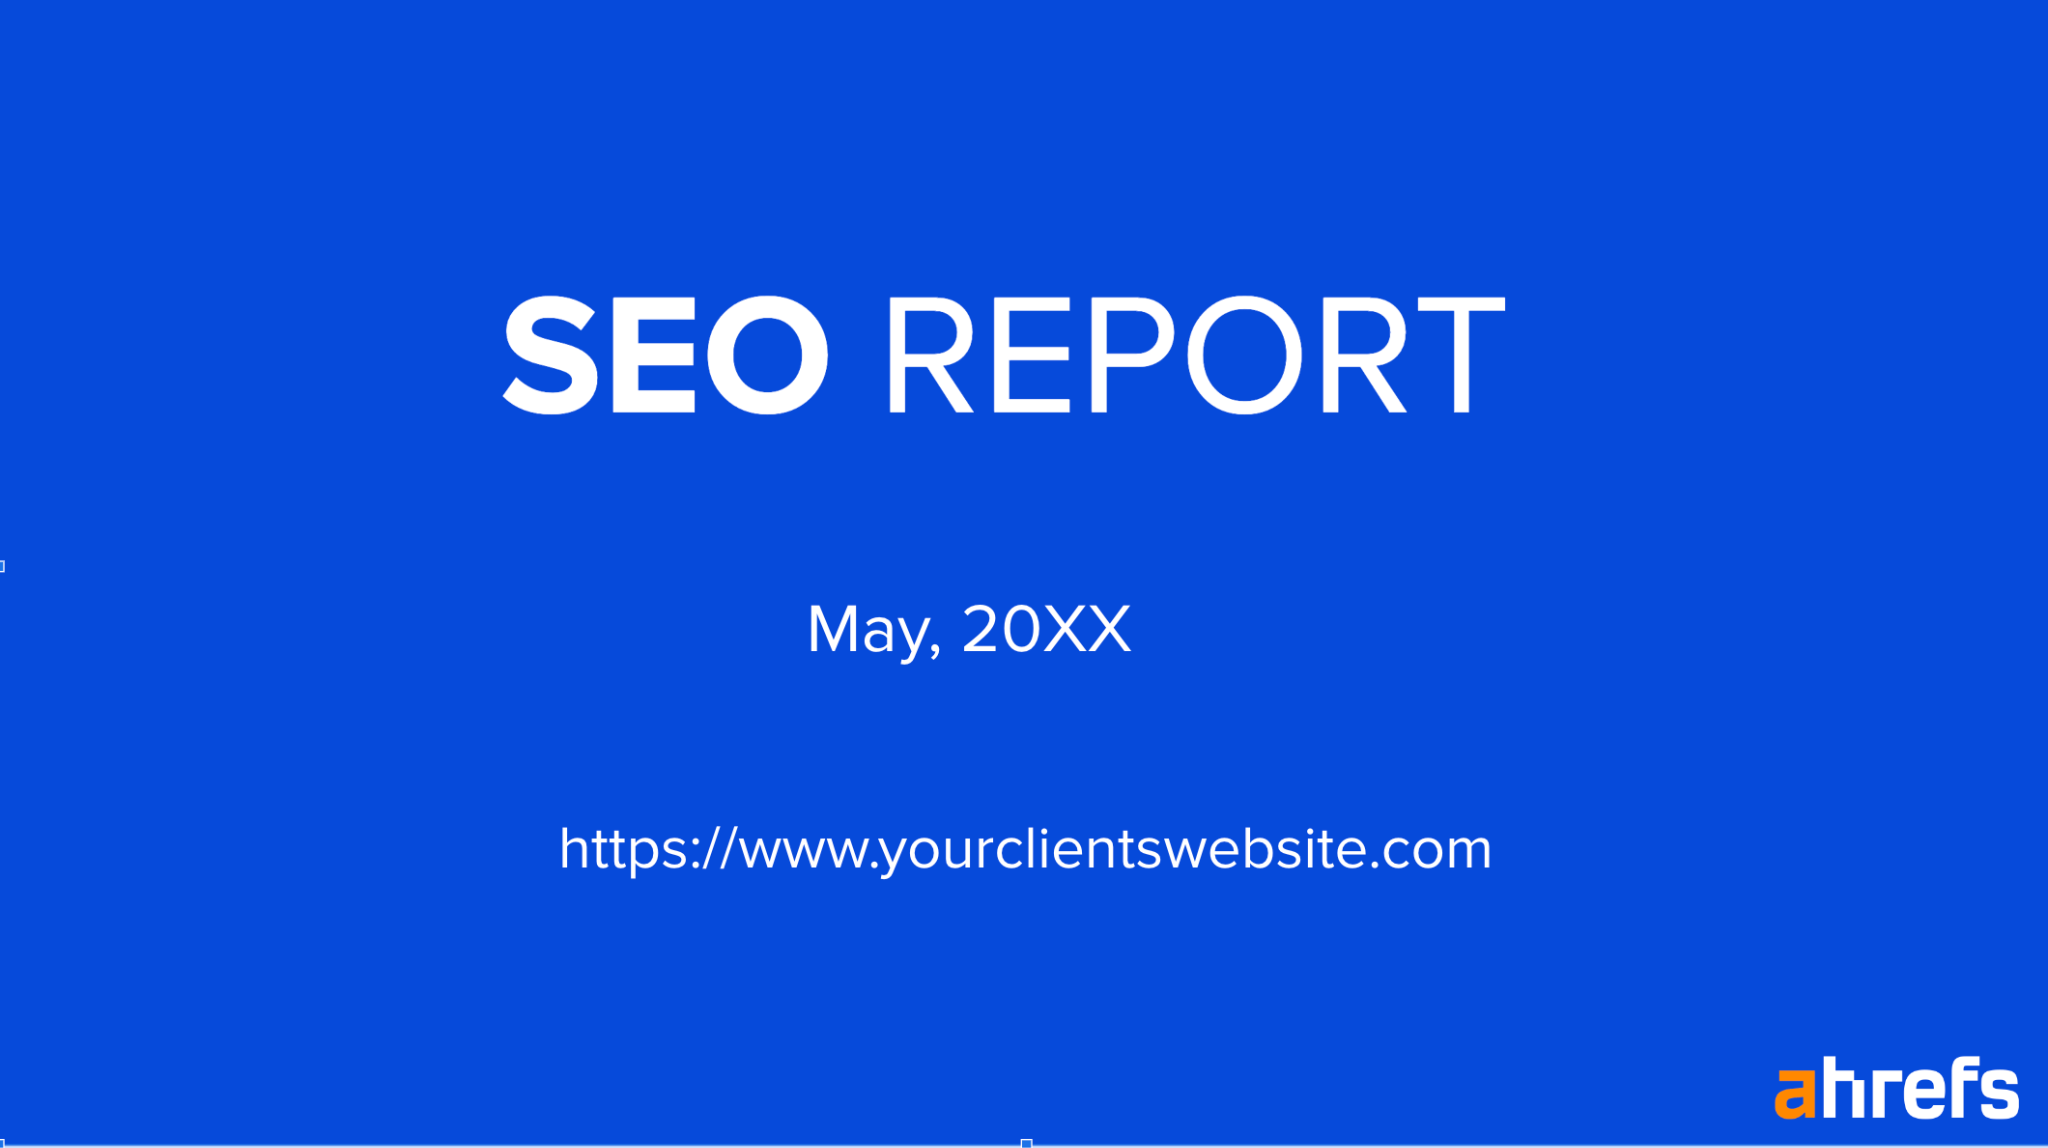 Steal Our SEO Report Template (Inspired by SEO Experts) |